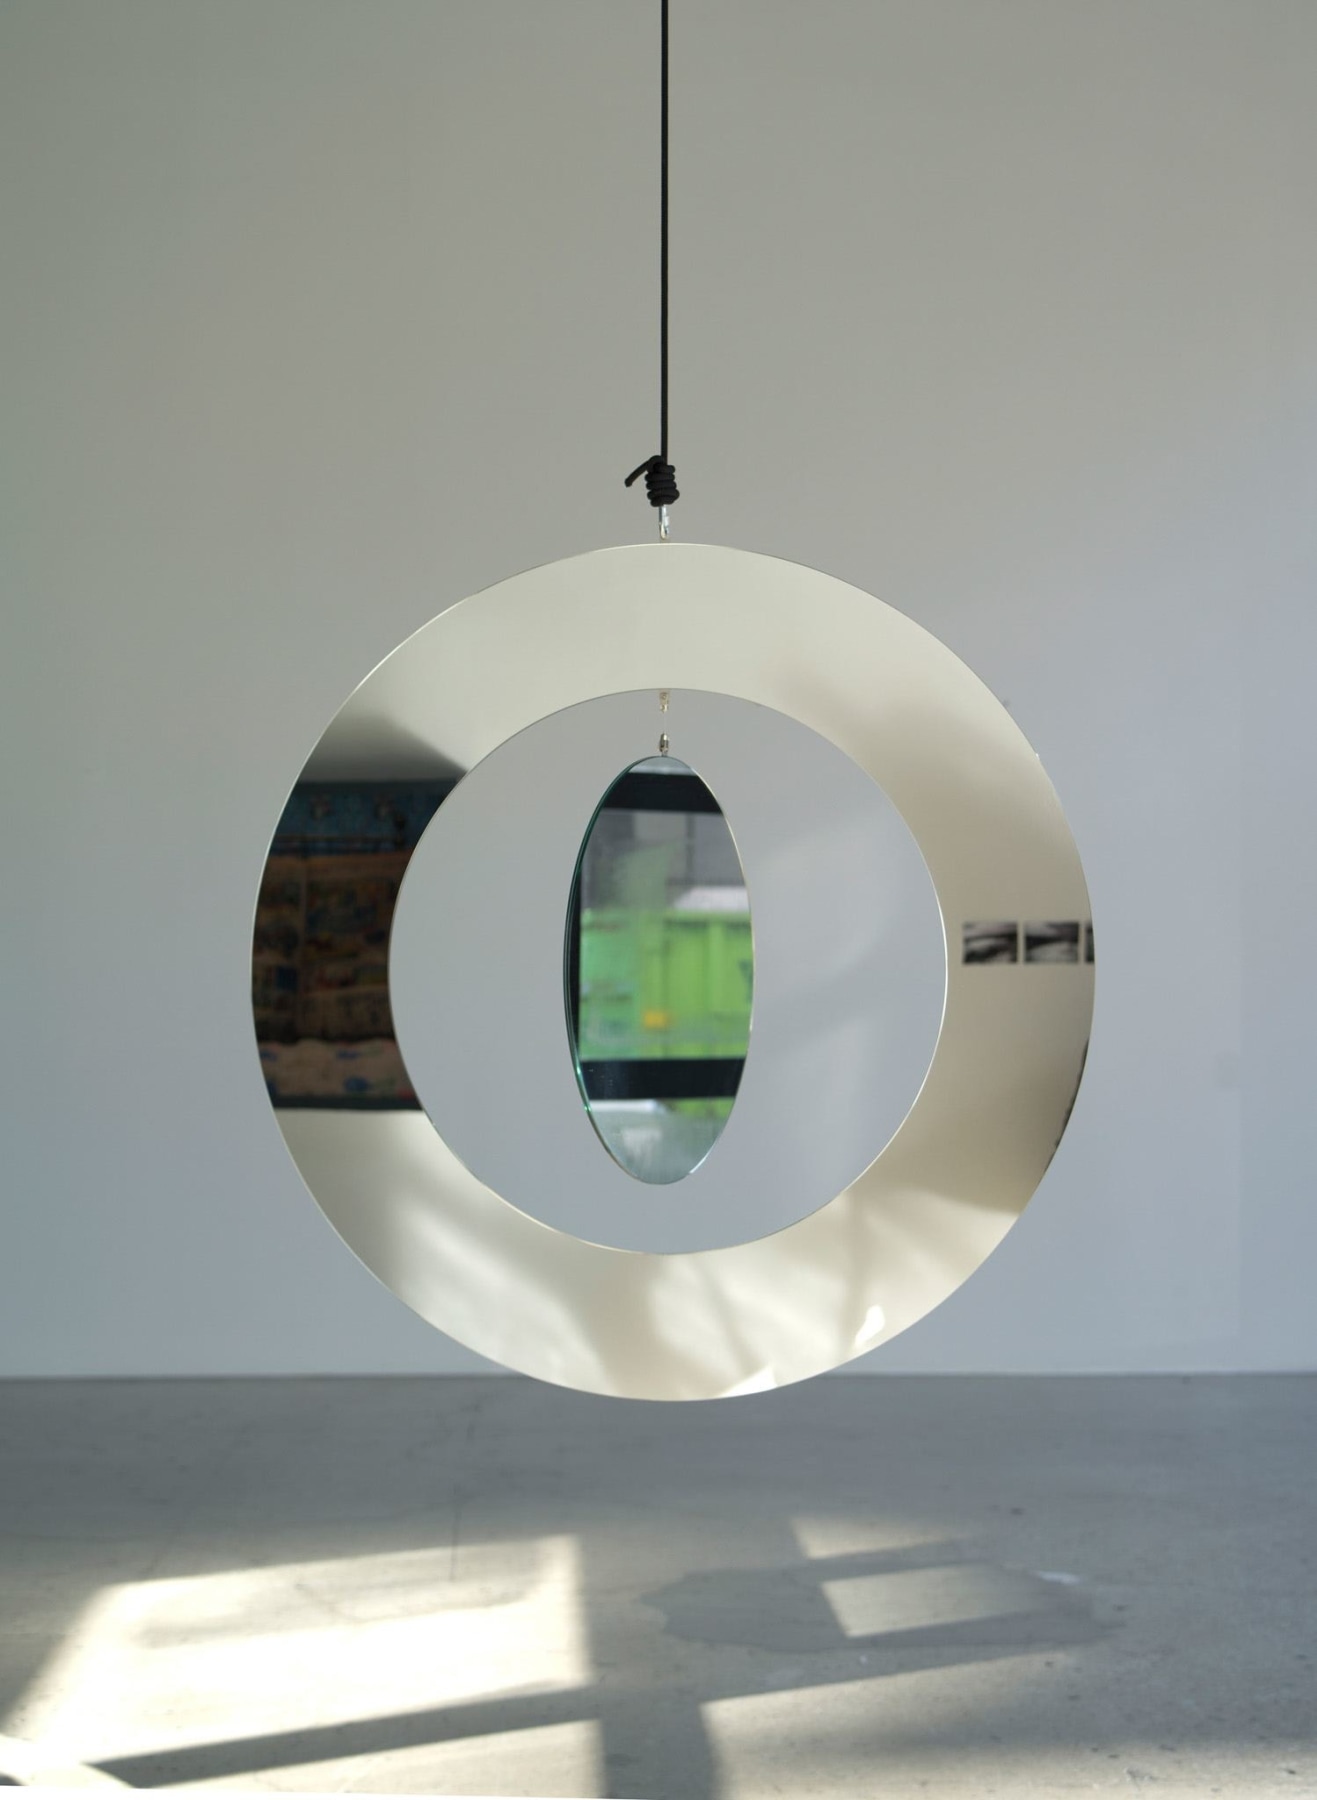 Jeppe Hein, Two in One Mirror Mobile